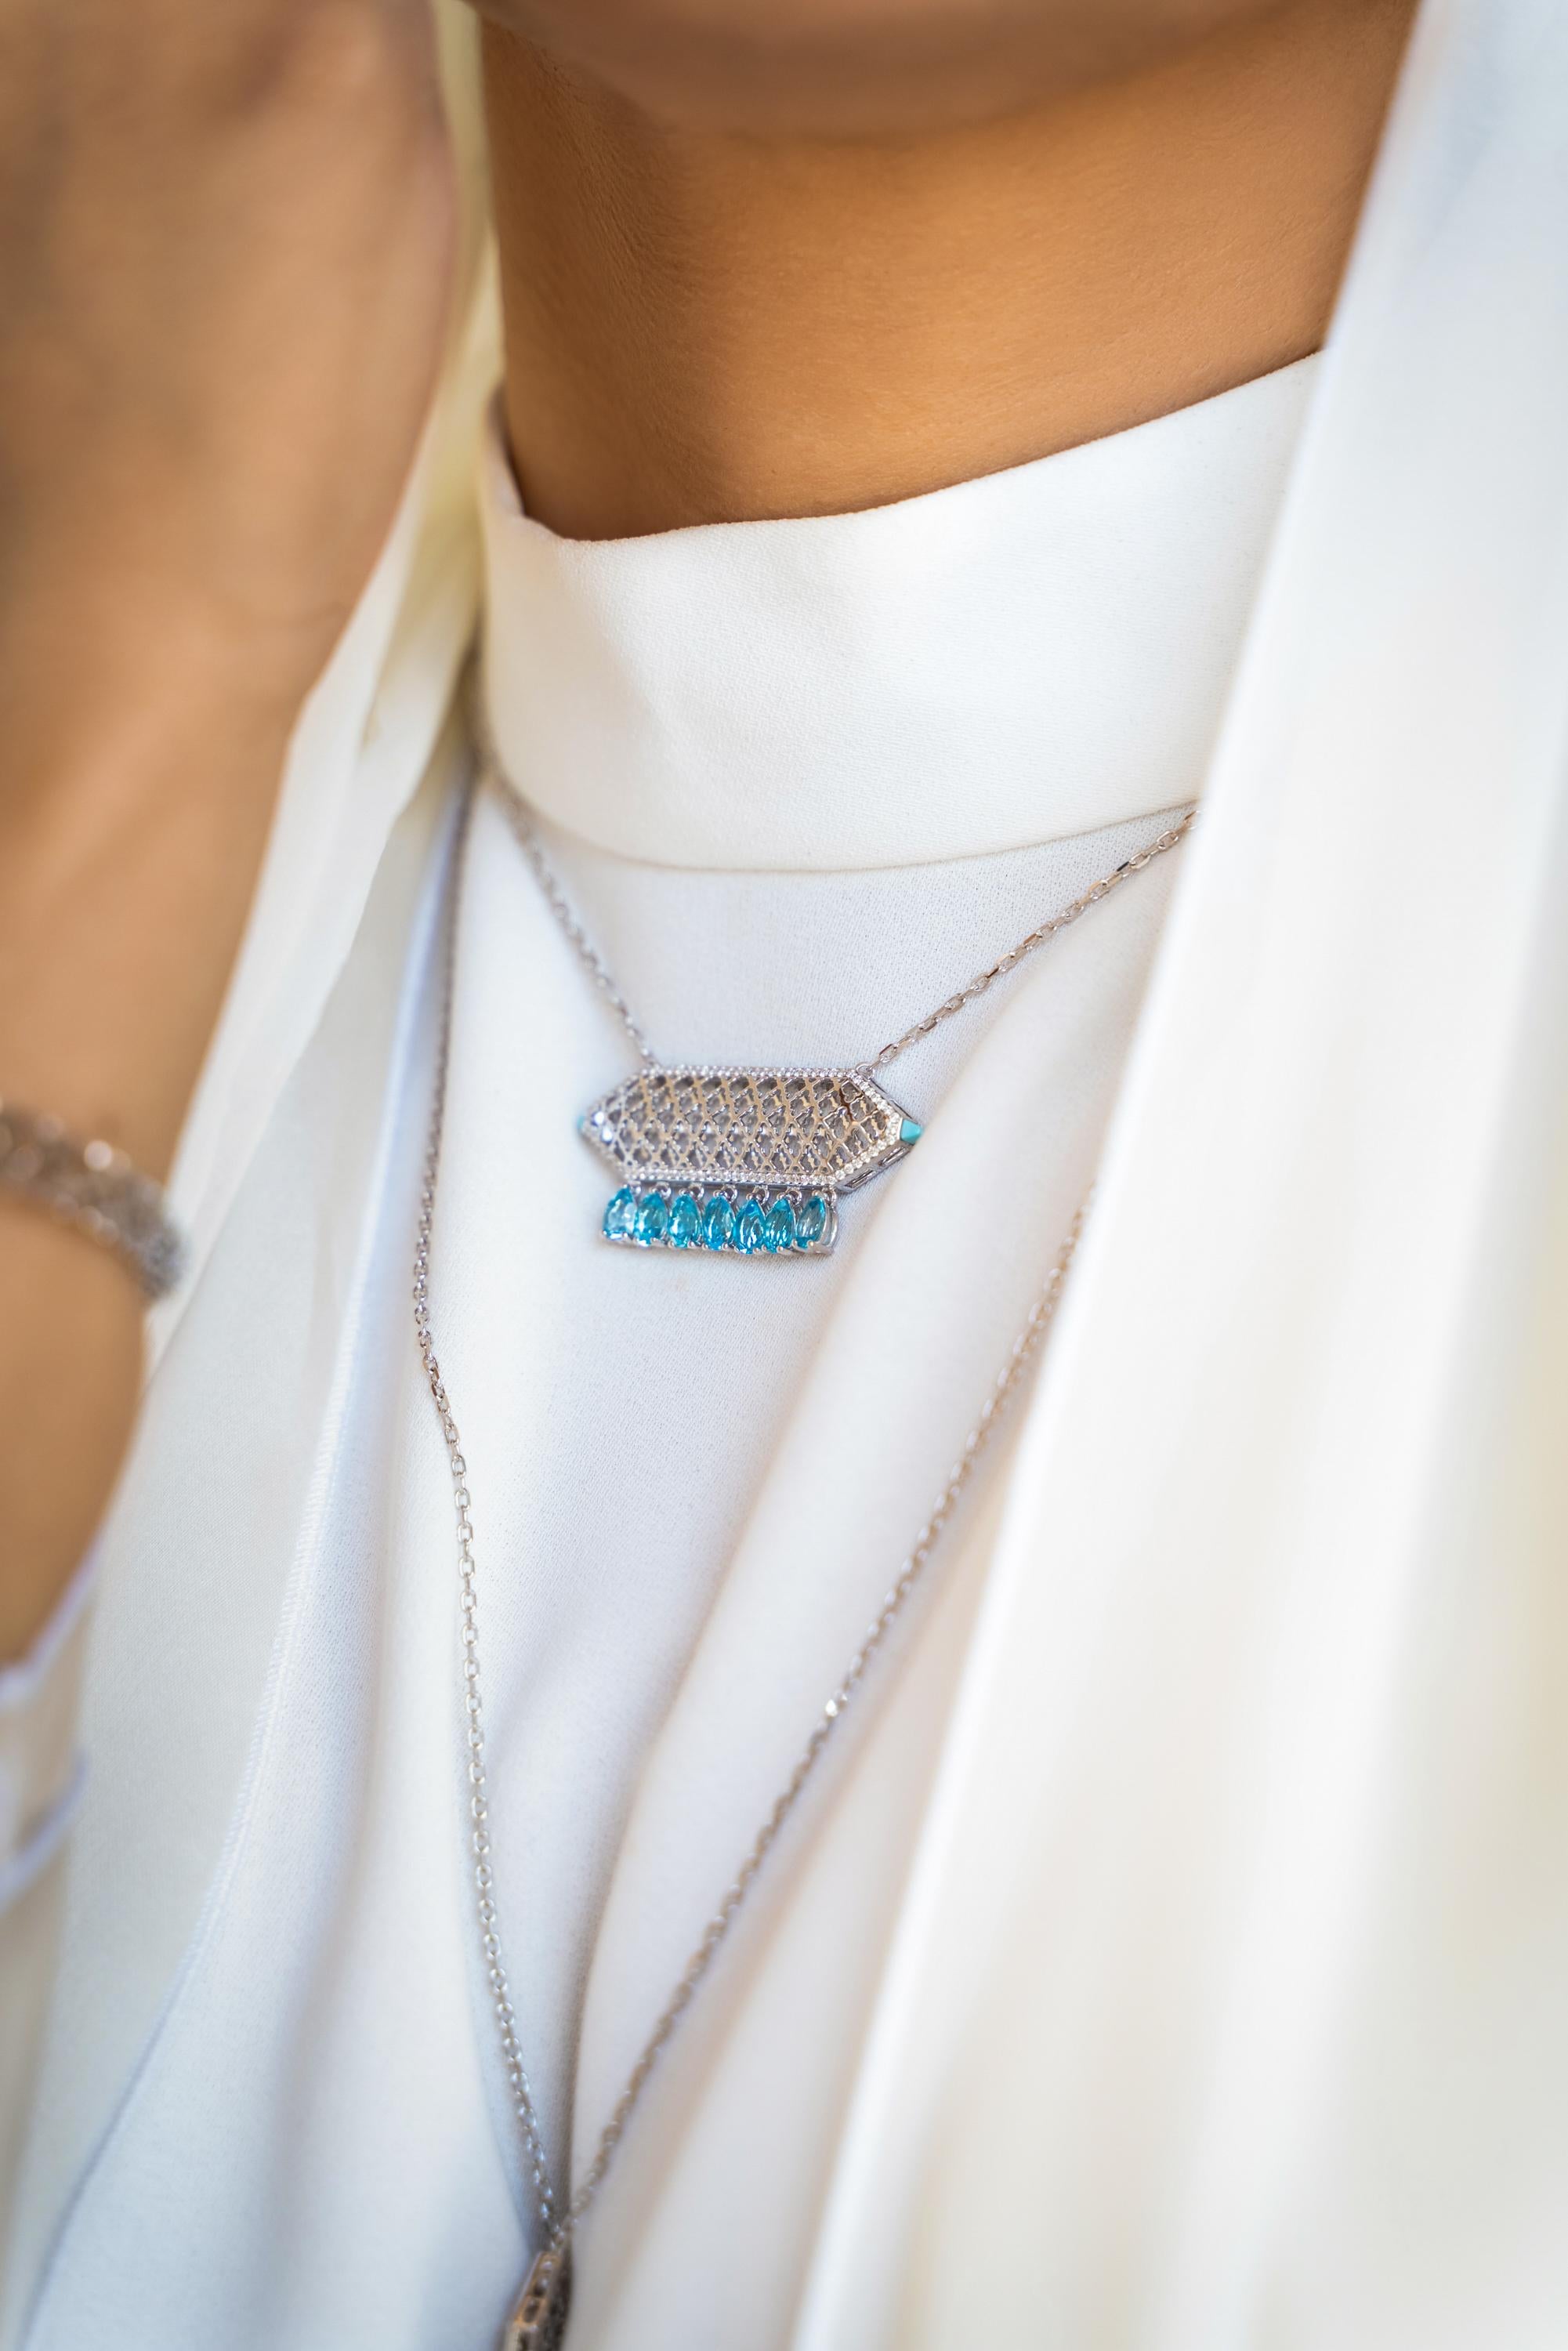 Necklace inspired by the Traditional Emirati Gold Jewellery, an intricate rectangular shape being completed by a delicate gemstone framed by a border set in brilliant cut diamonds and hanging aquamarine.

Chain in rope style with adjustable sliding